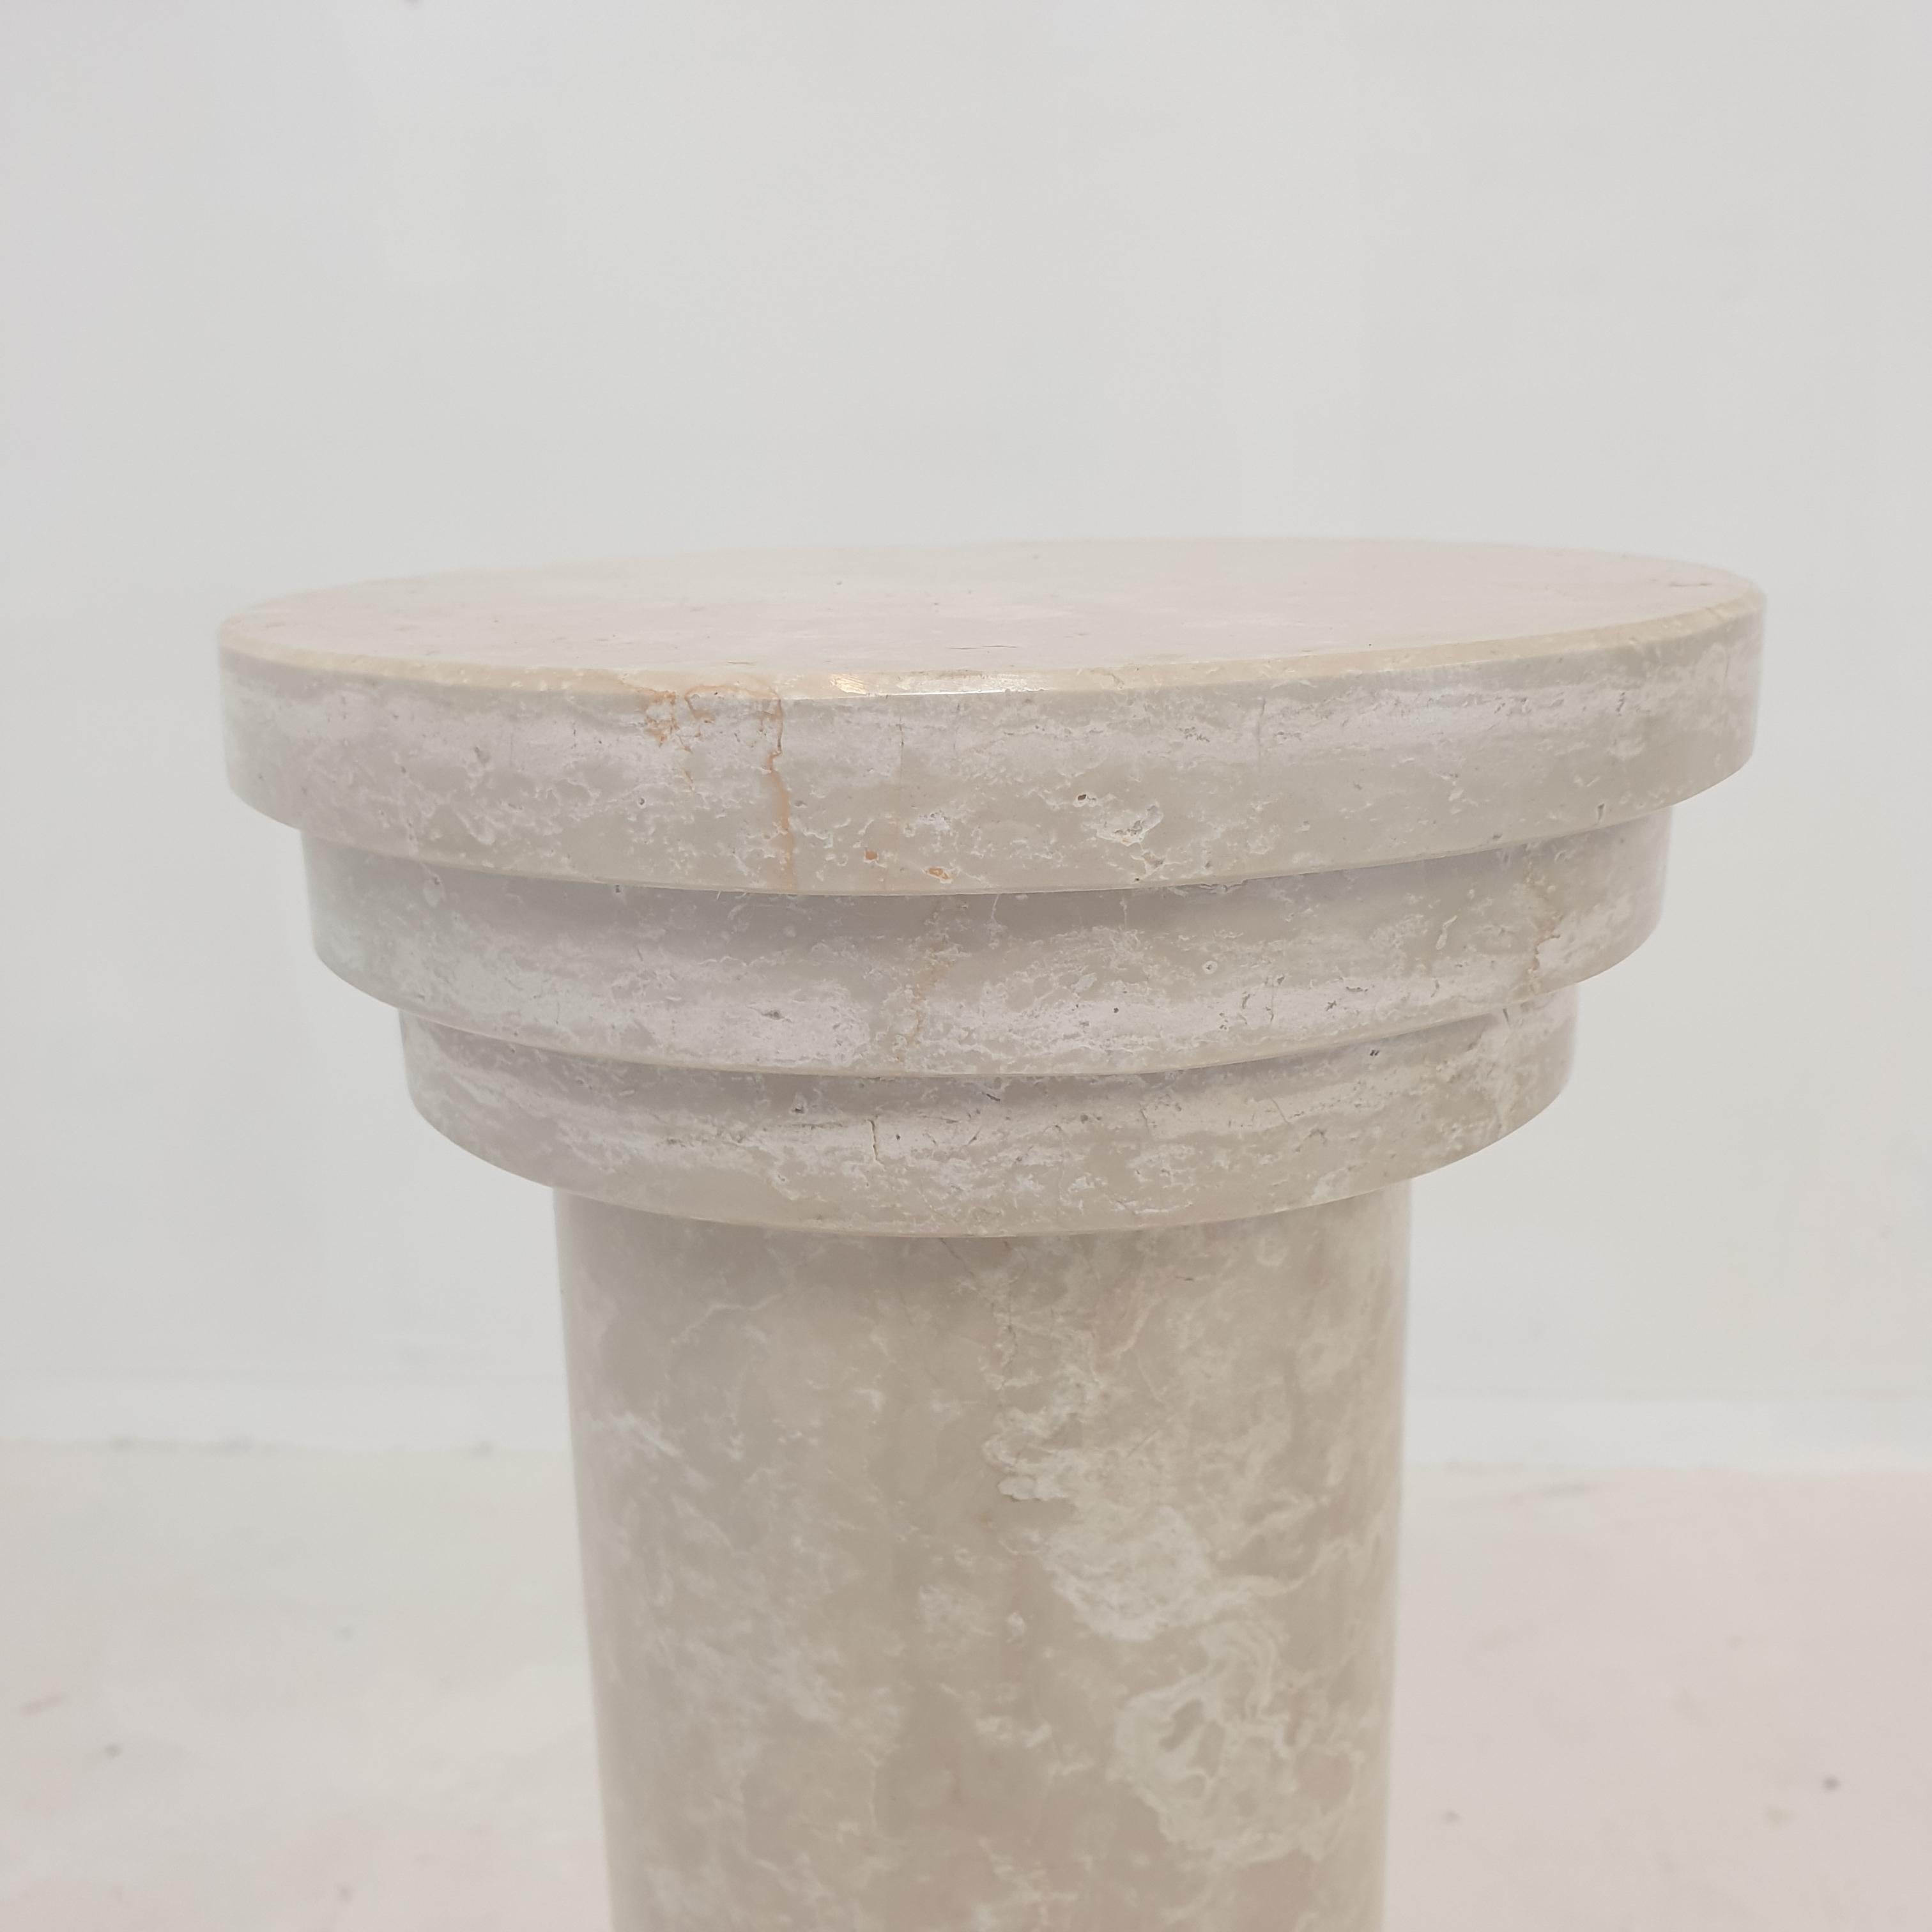 Italian Travertine Side Table or Pedestal, 1980s For Sale 4